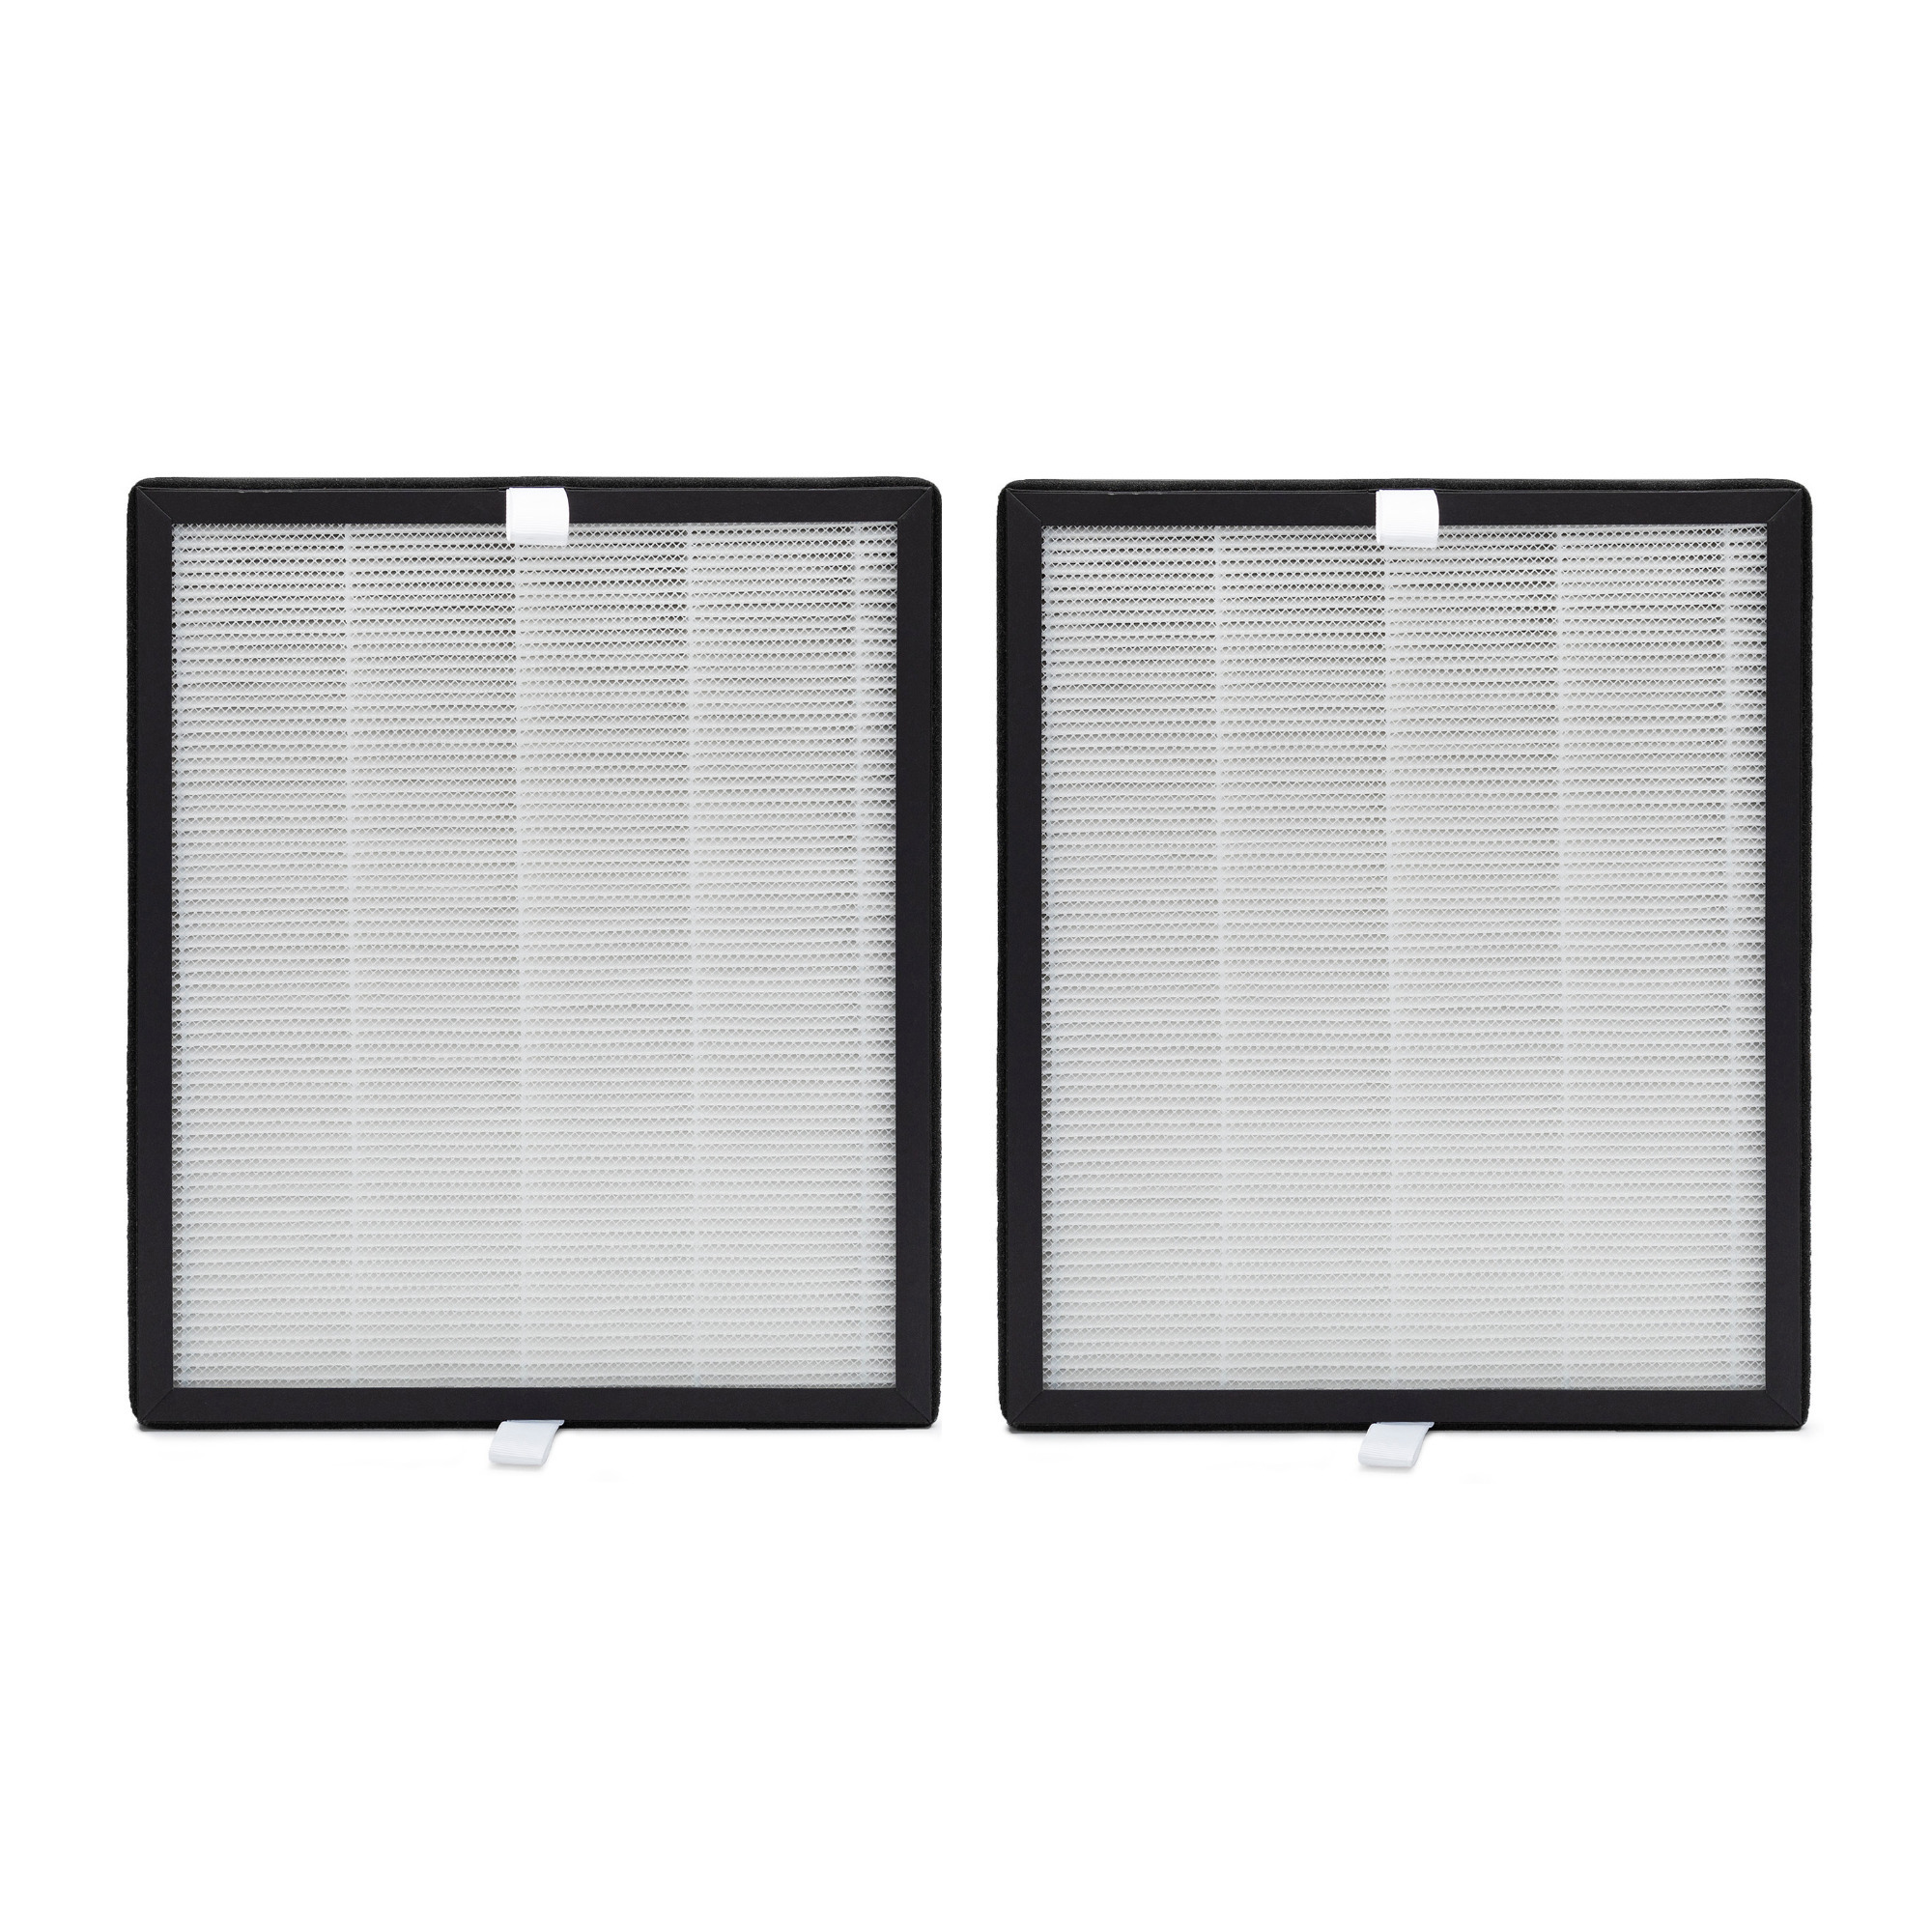 Lifestyle by Focus HEPA Filter Replacement for LS-AP200 Pura Air Purifier (2-Pk)